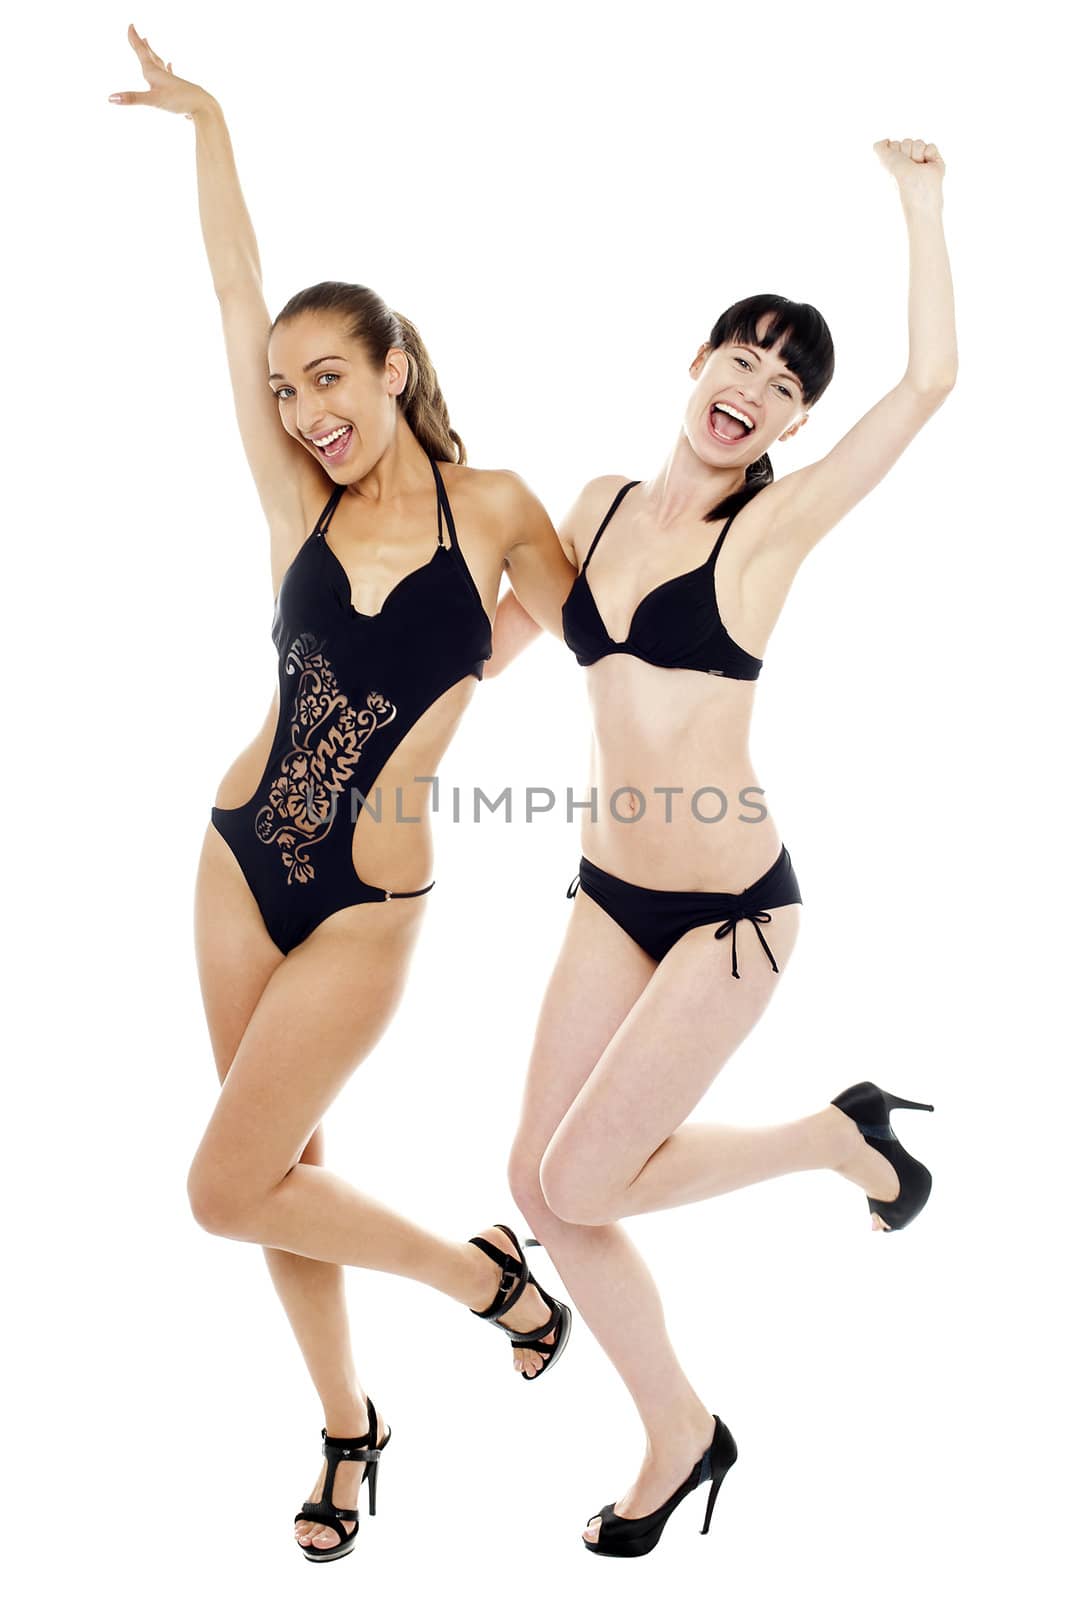 Sexy bikini ladies in joyous mood rejoicing together. Isolated against white background